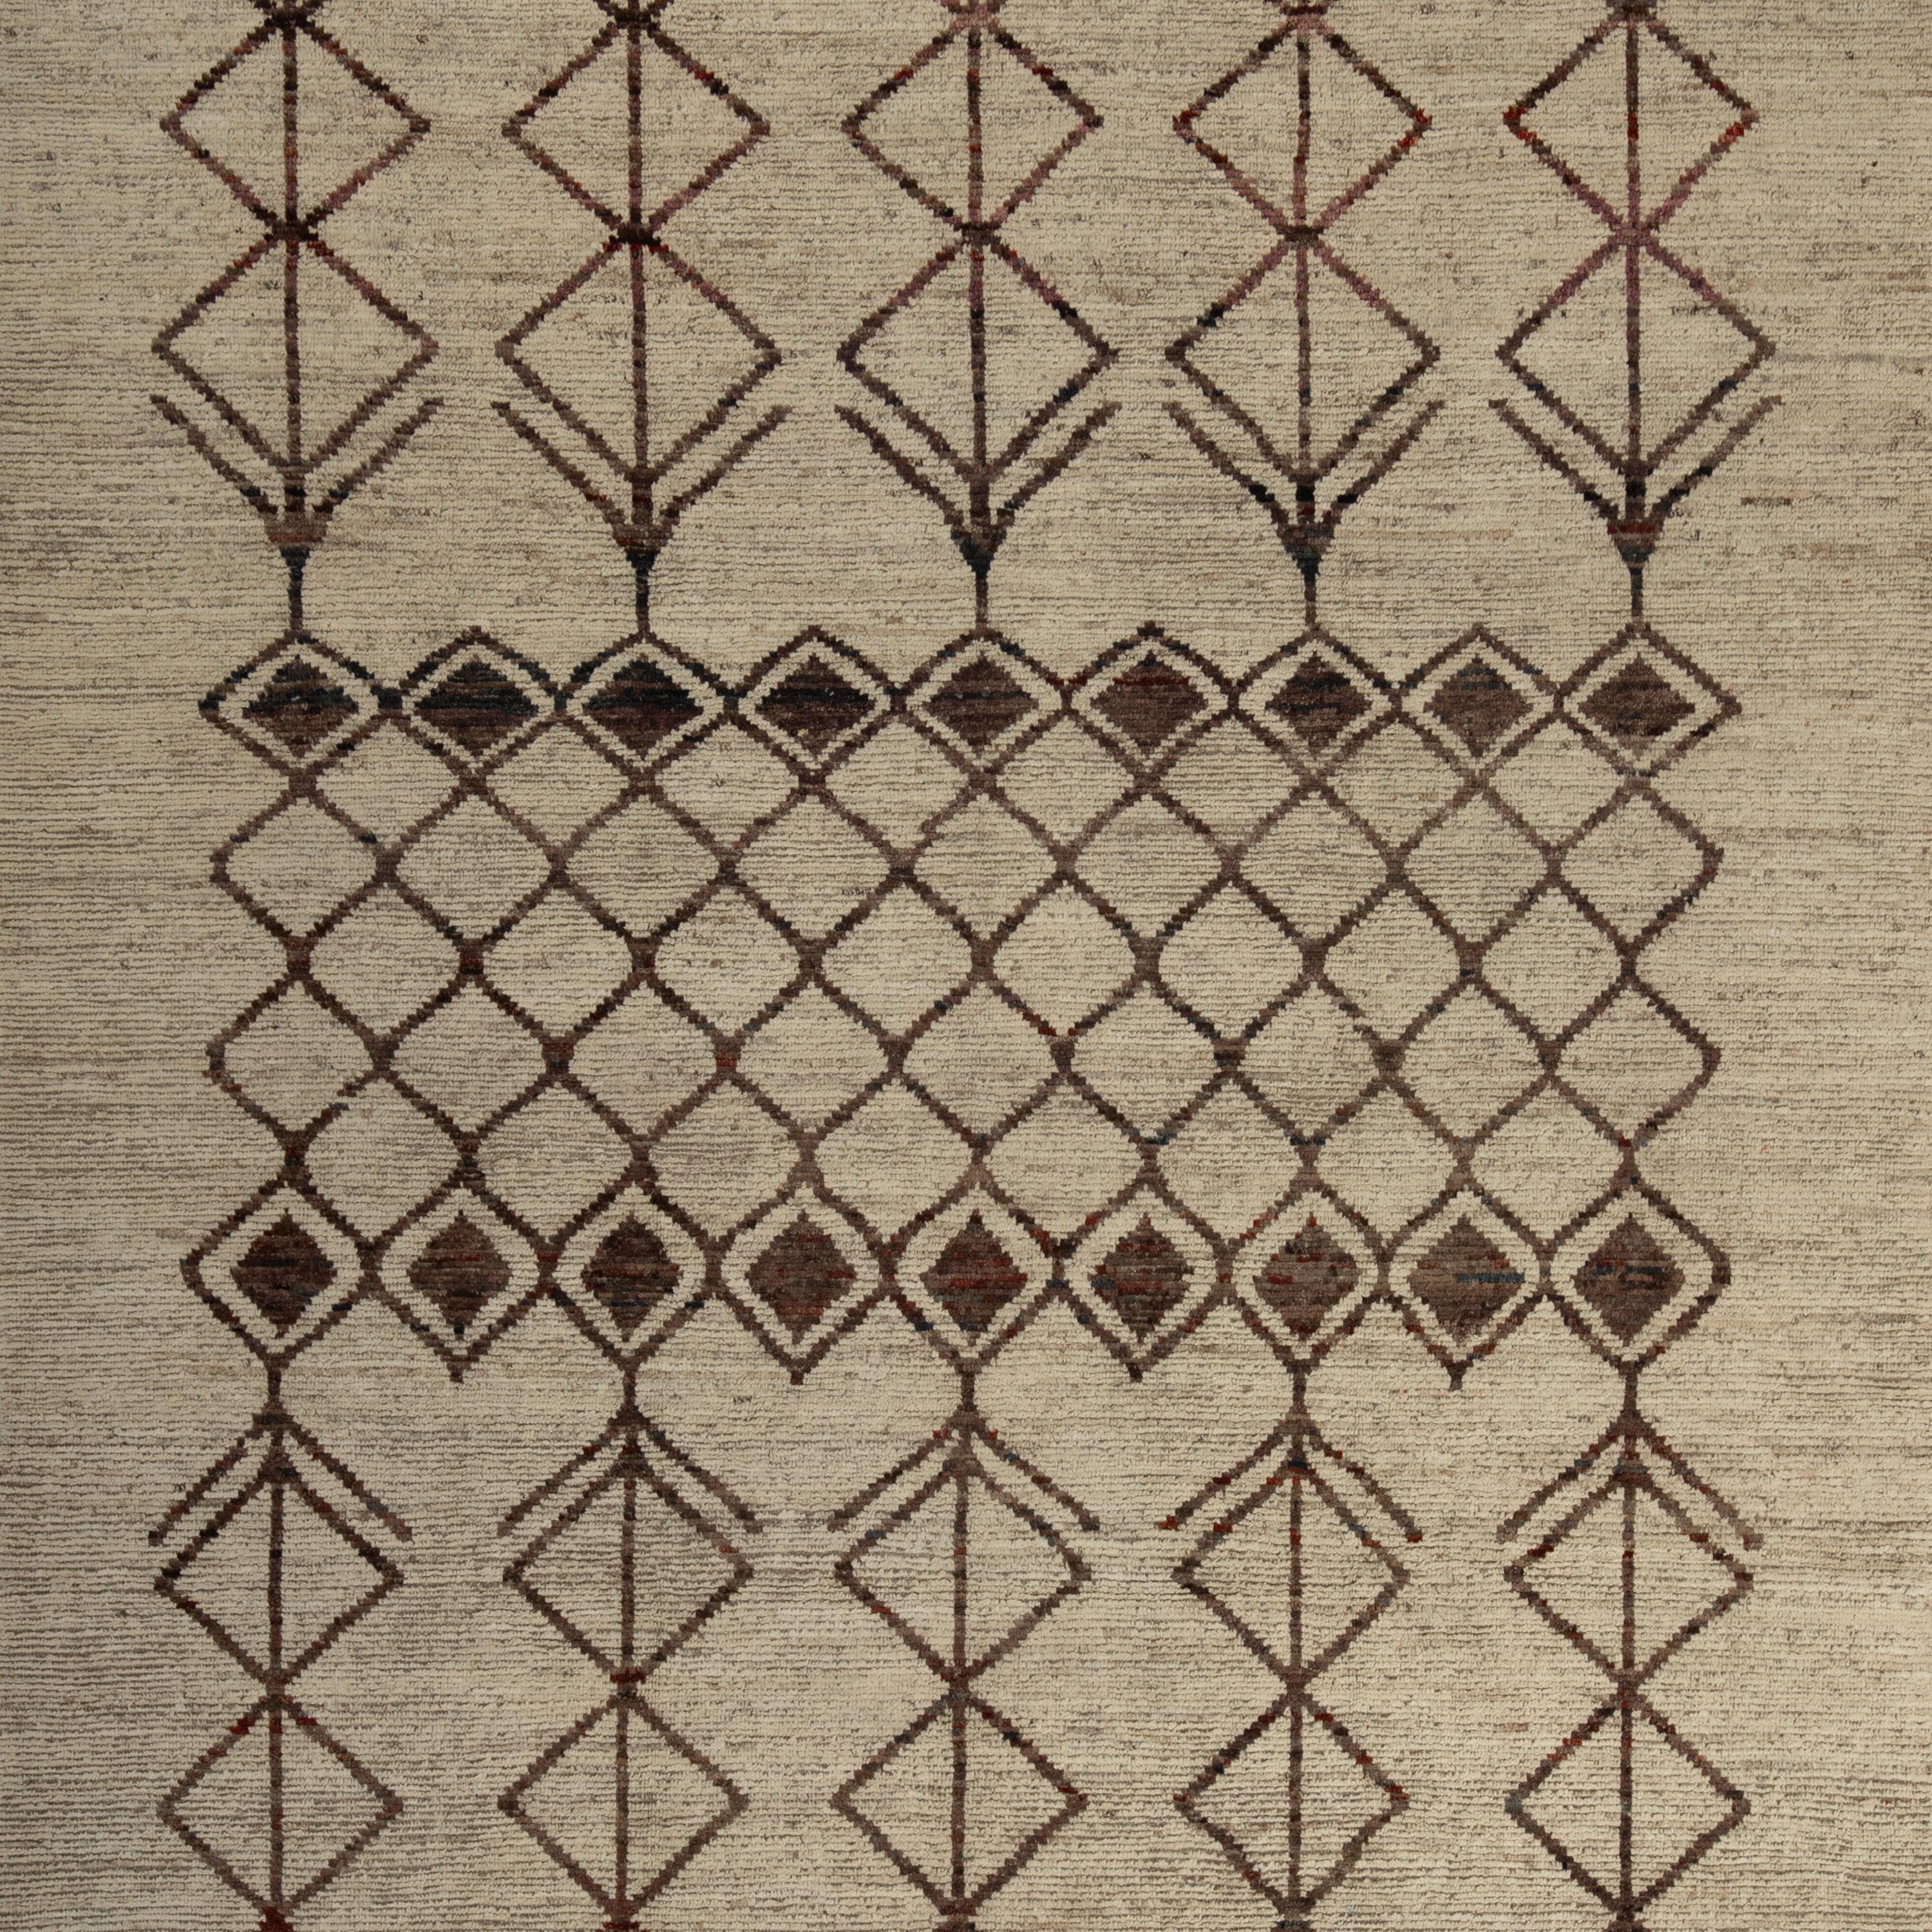 Inspired by the grounding foundations of Earth's natural colors and pure materials, this Zameen Brown and Beige Tribal Wool Rug - 8'11